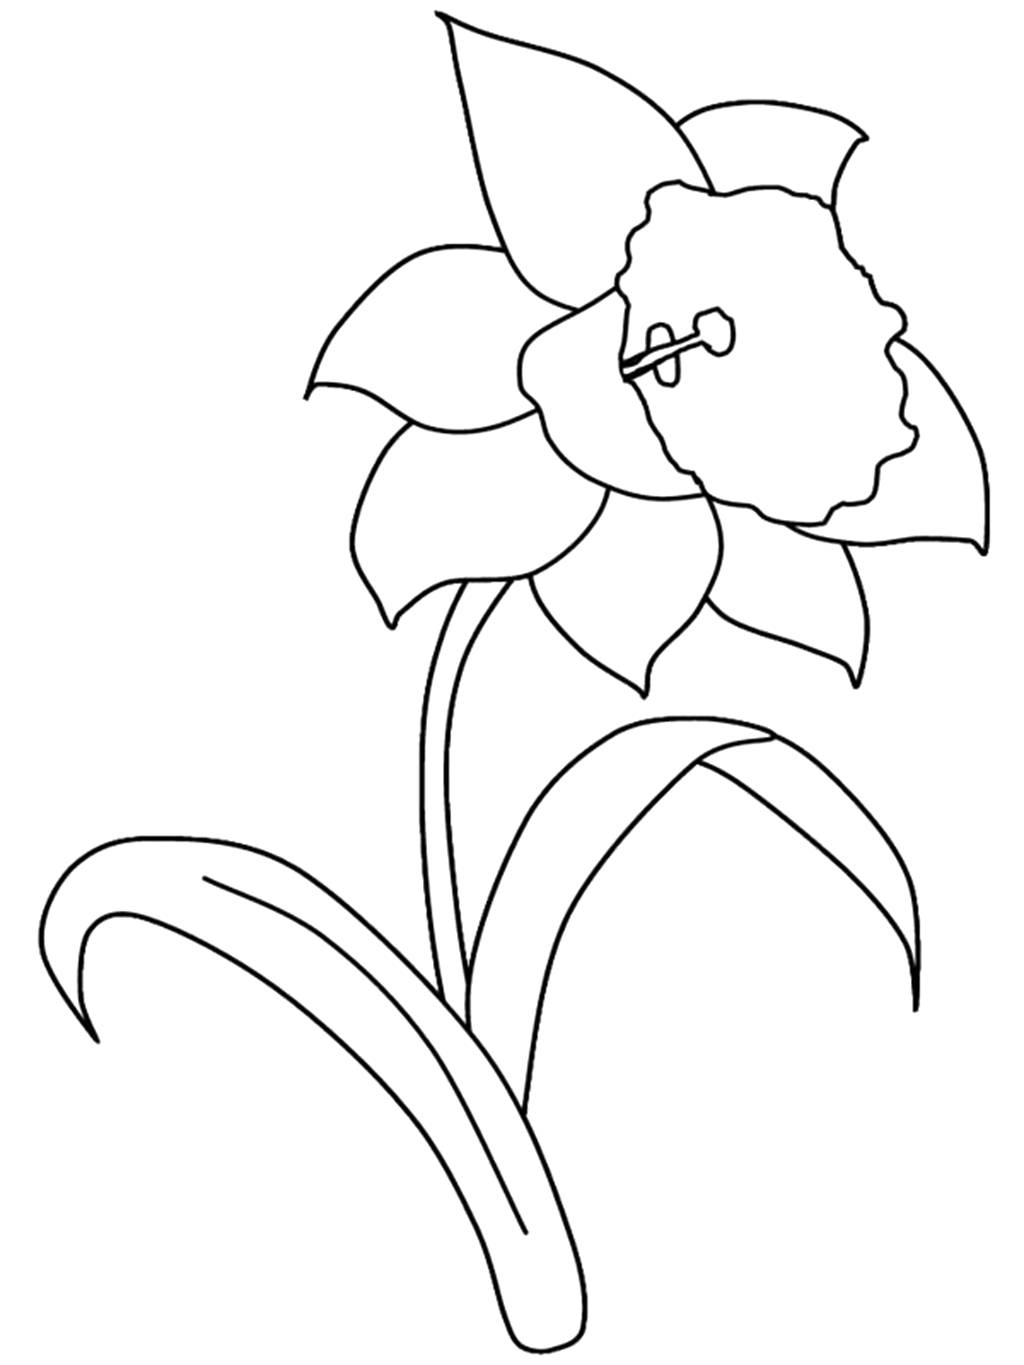 Daffodil Flower Coloring Page at GetColorings.com | Free printable